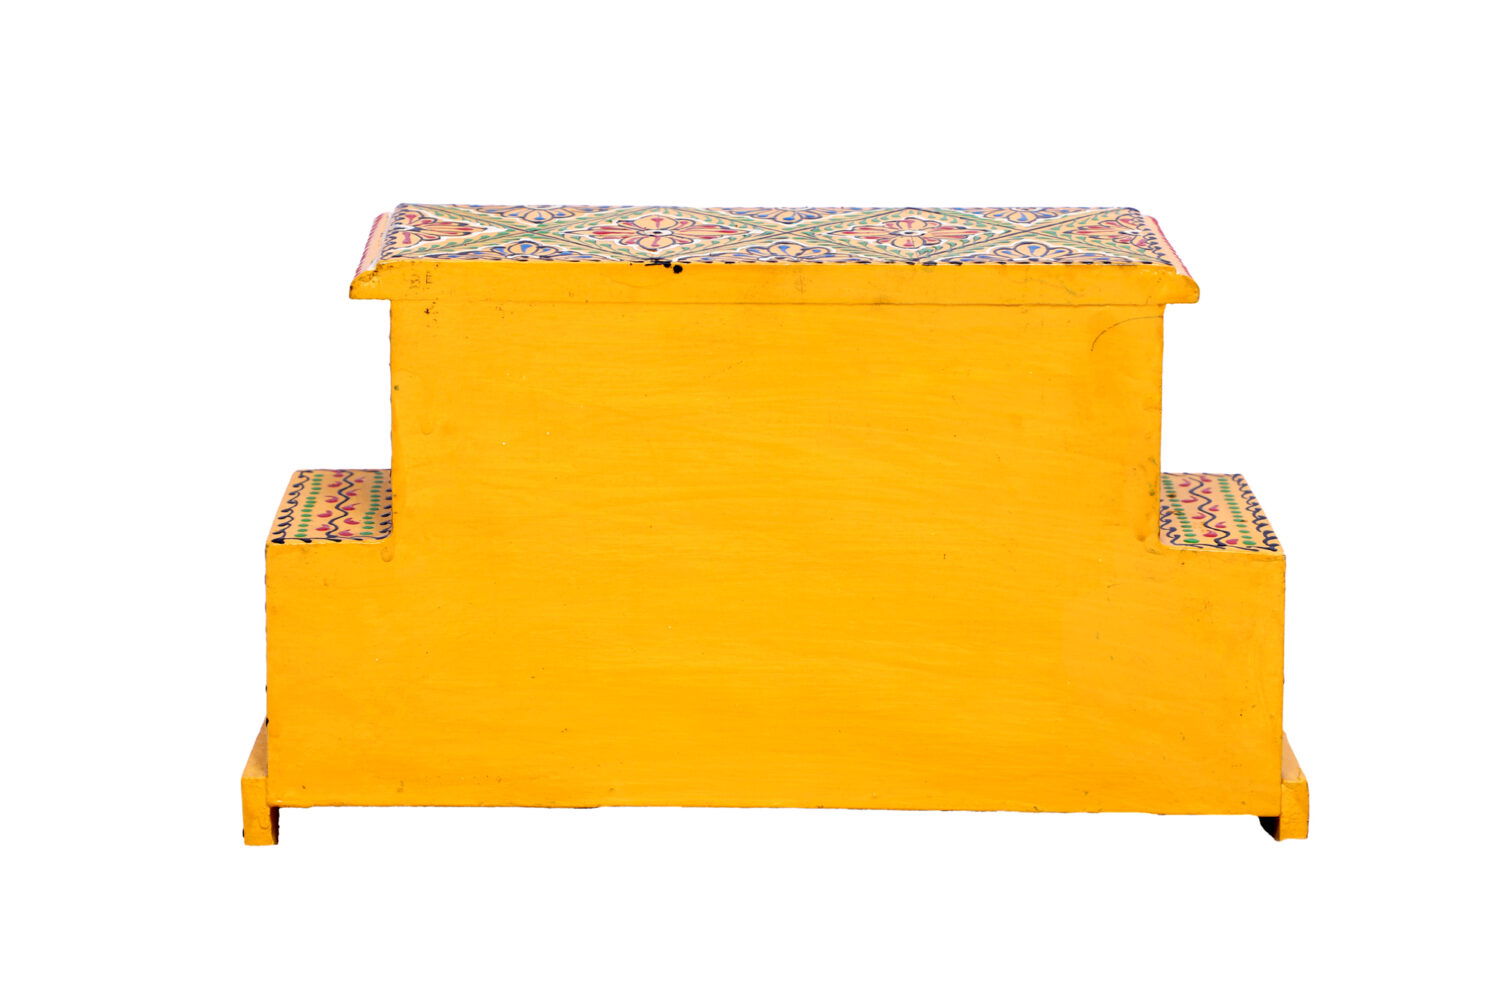 Hand Painted Ceramic Drawer box -7 Drawer - pacificexportsimports - #tag1#